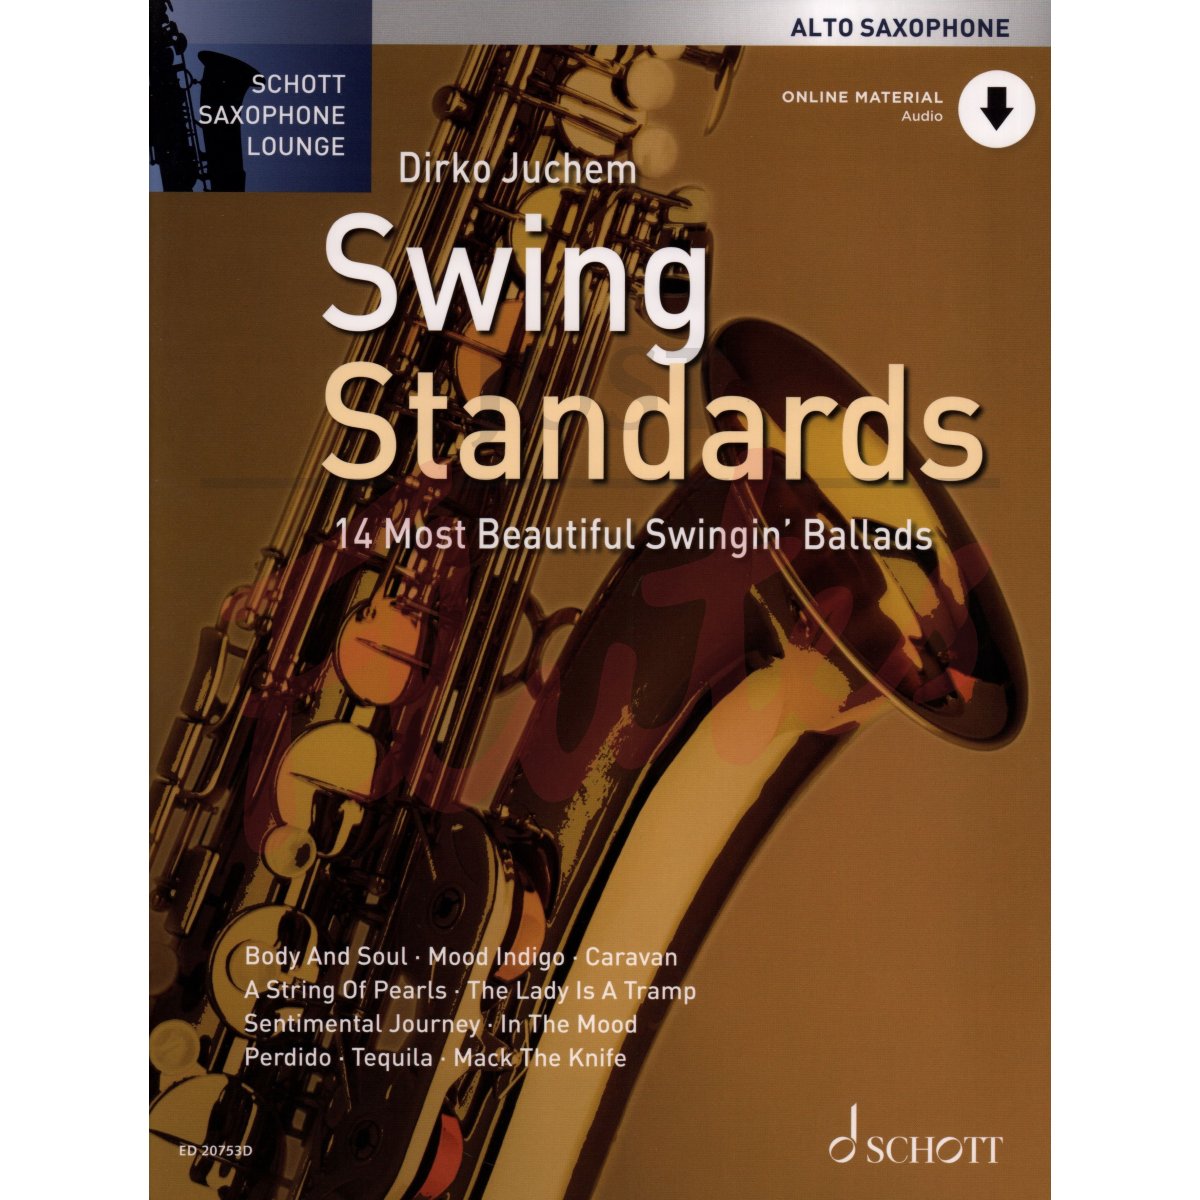 Schott Saxophone Lounge: Swing Standards for Alto Saxophone and Piano